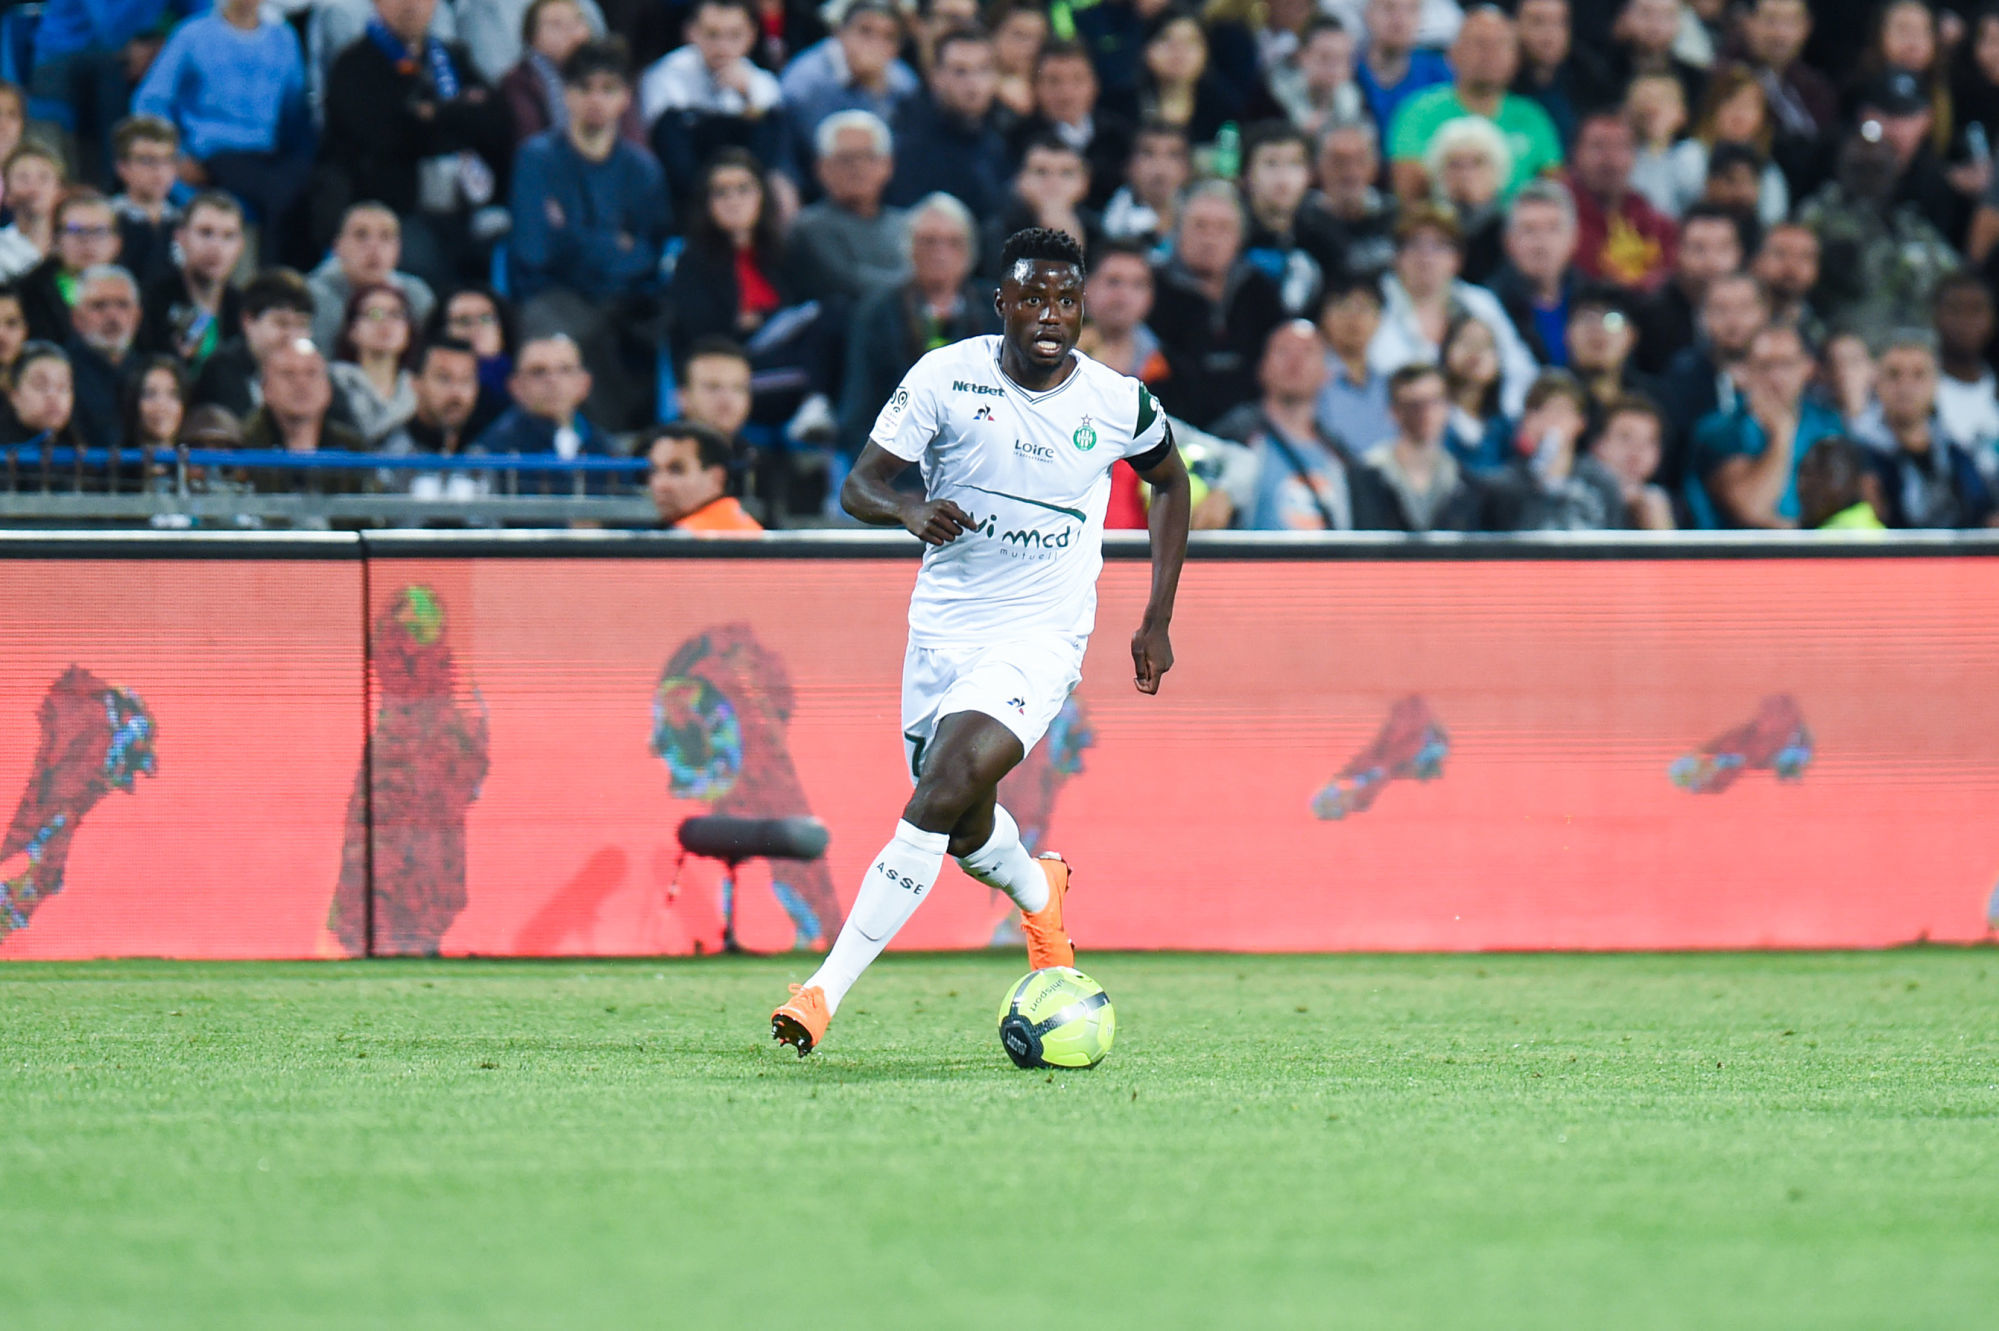 Paul Georges NtEp of Saint Etienne during the Ligue 1 match between Montpellier Herault SC and AS Saint-Etienne at Stade de la Mosson on April 27, 2018 in Montpellier, . (Photo by Alexandre Dimou/Icon Sport)